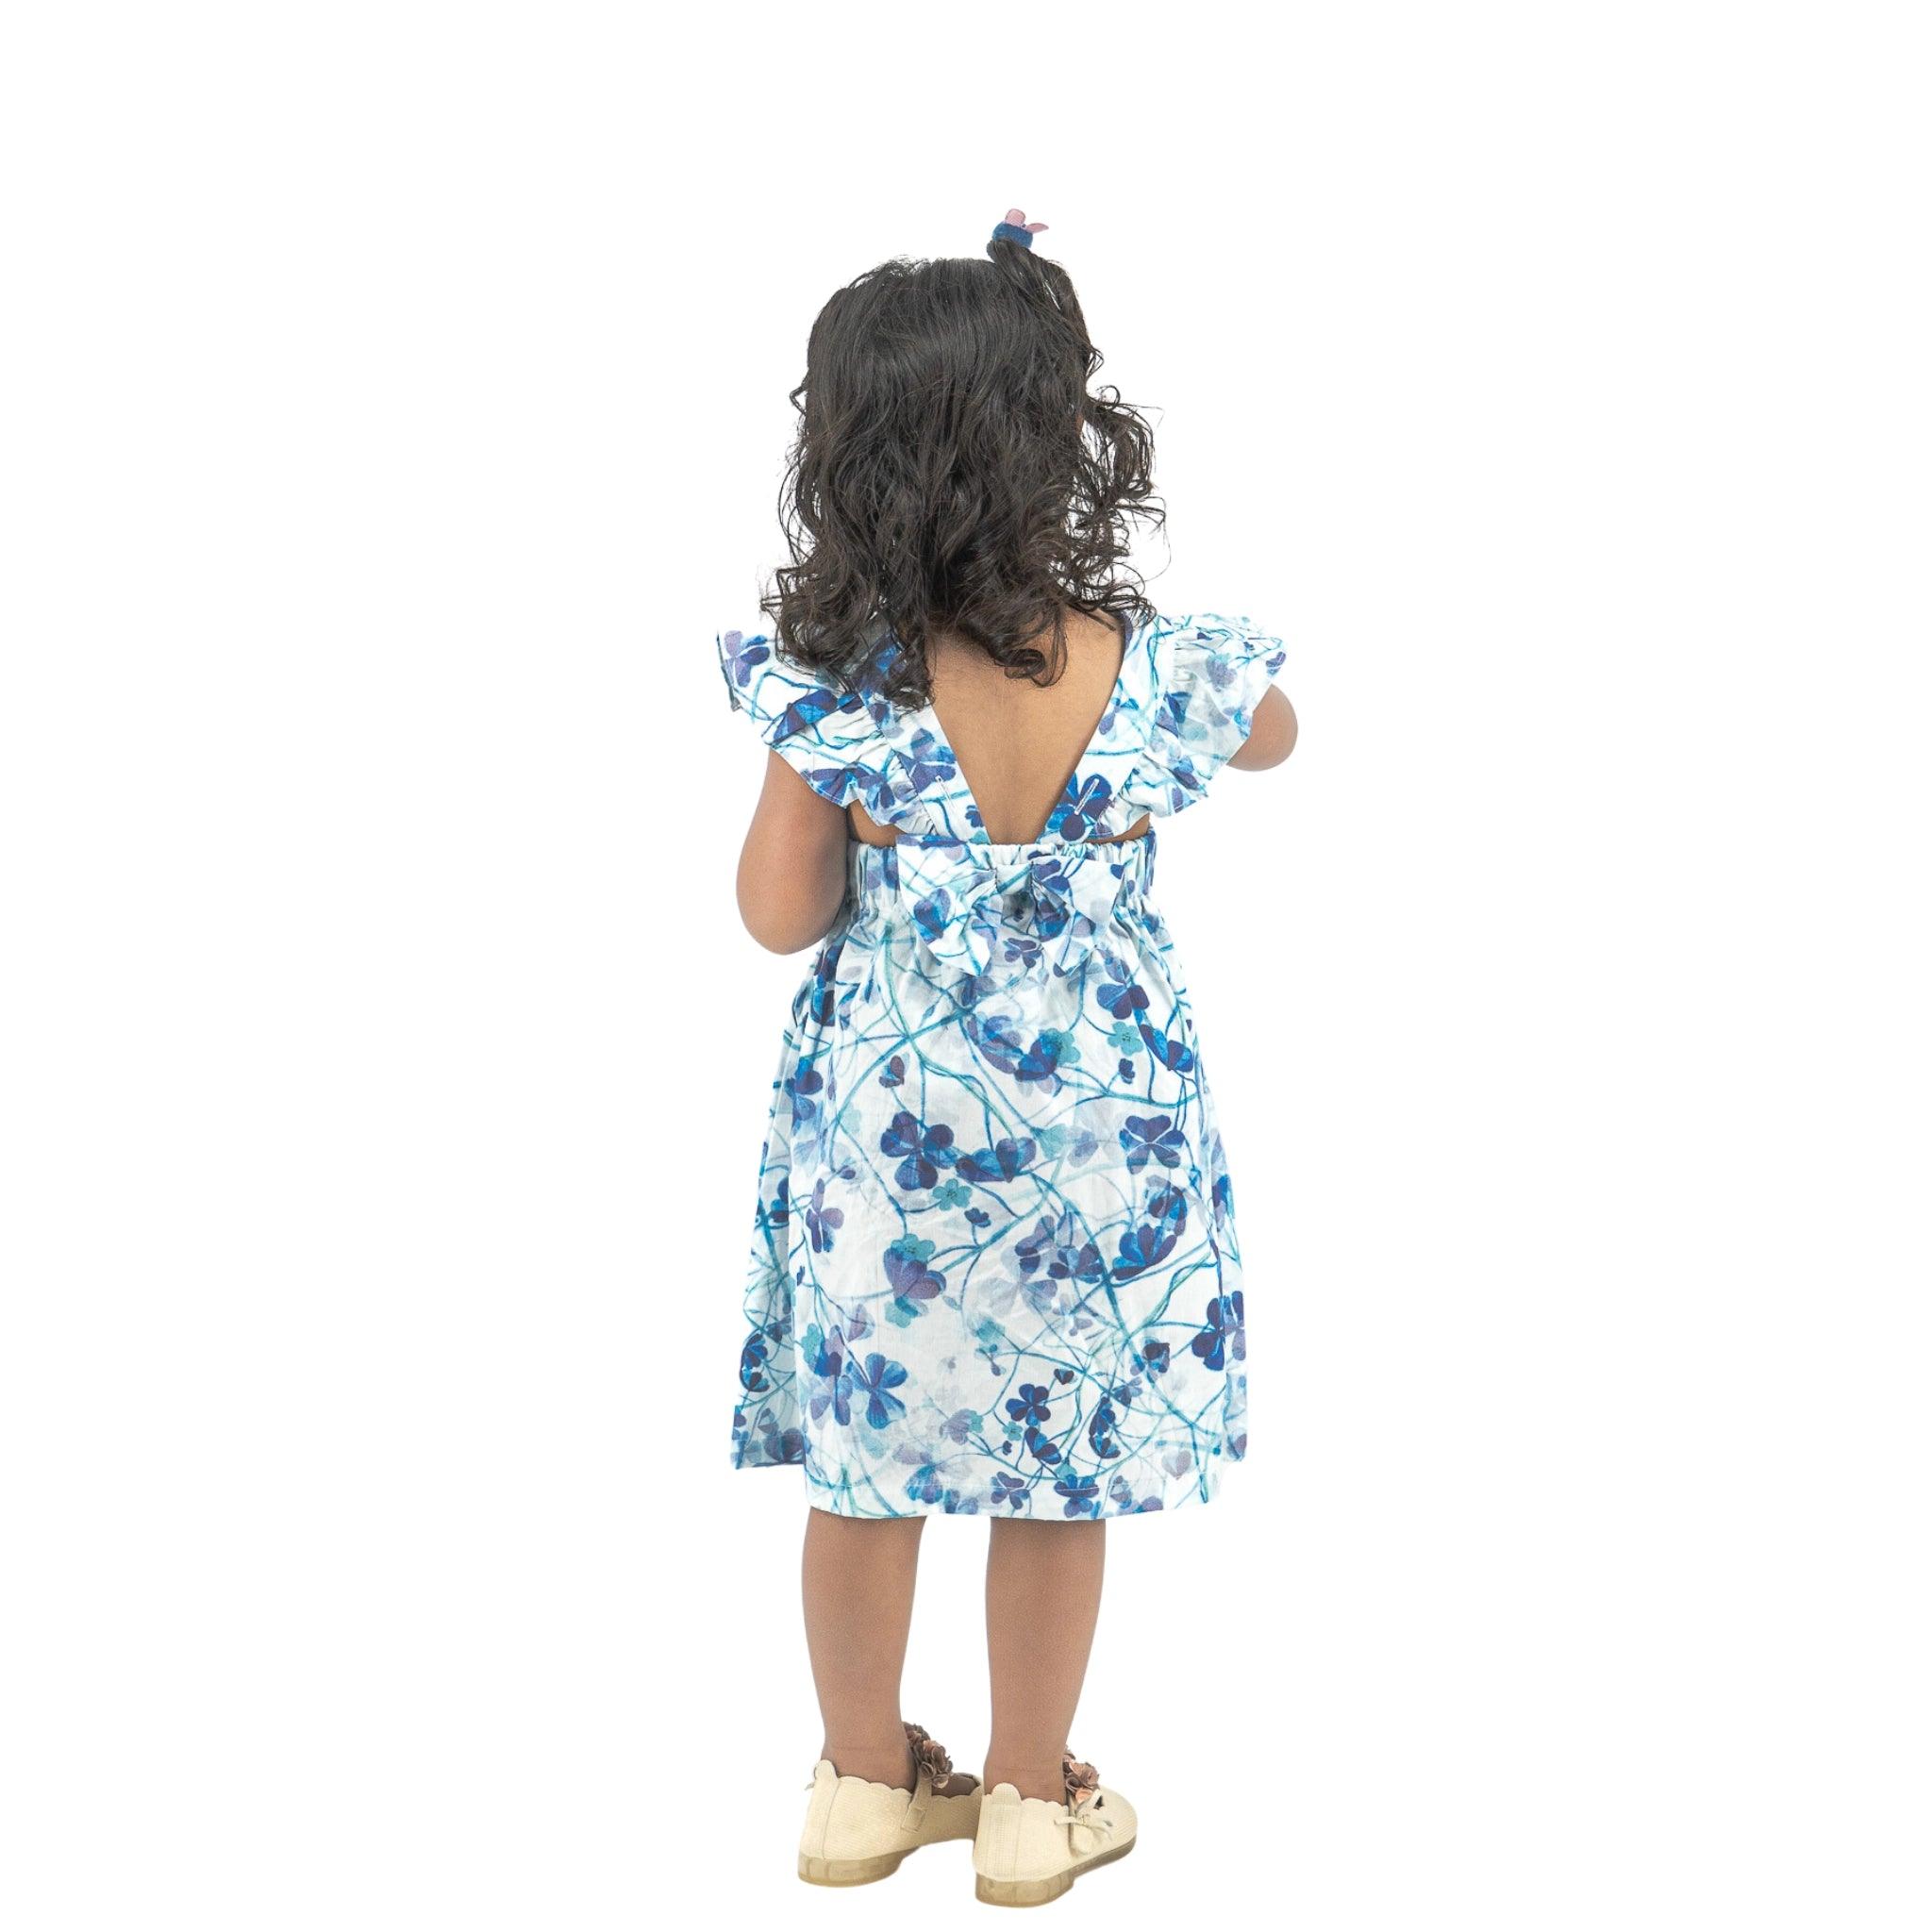 Young girl in a Karee Blue Cotton Floral Dress for Girls seen from the back, standing against a white background.